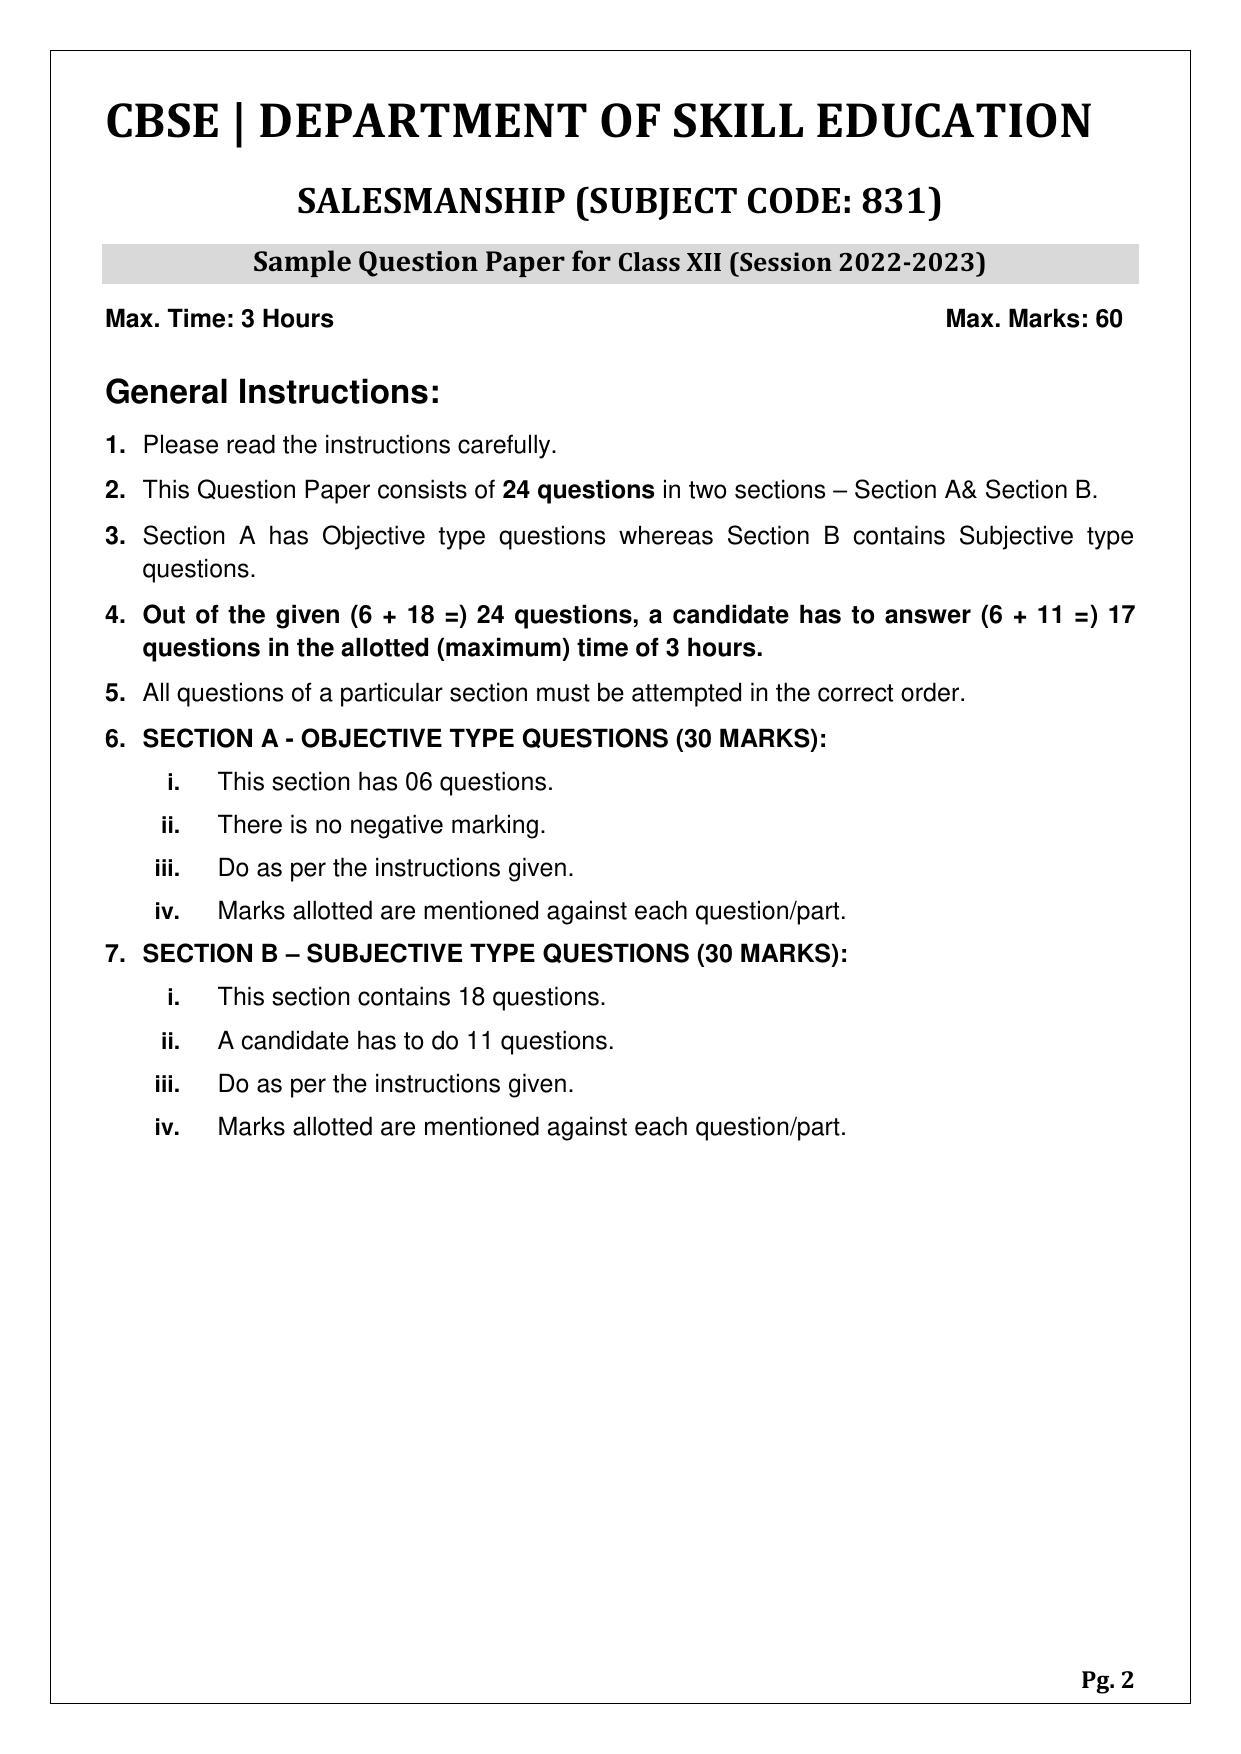 CBSE Class 10 Salesmanship (Skill Education) Sample Papers 2023 - Page 2